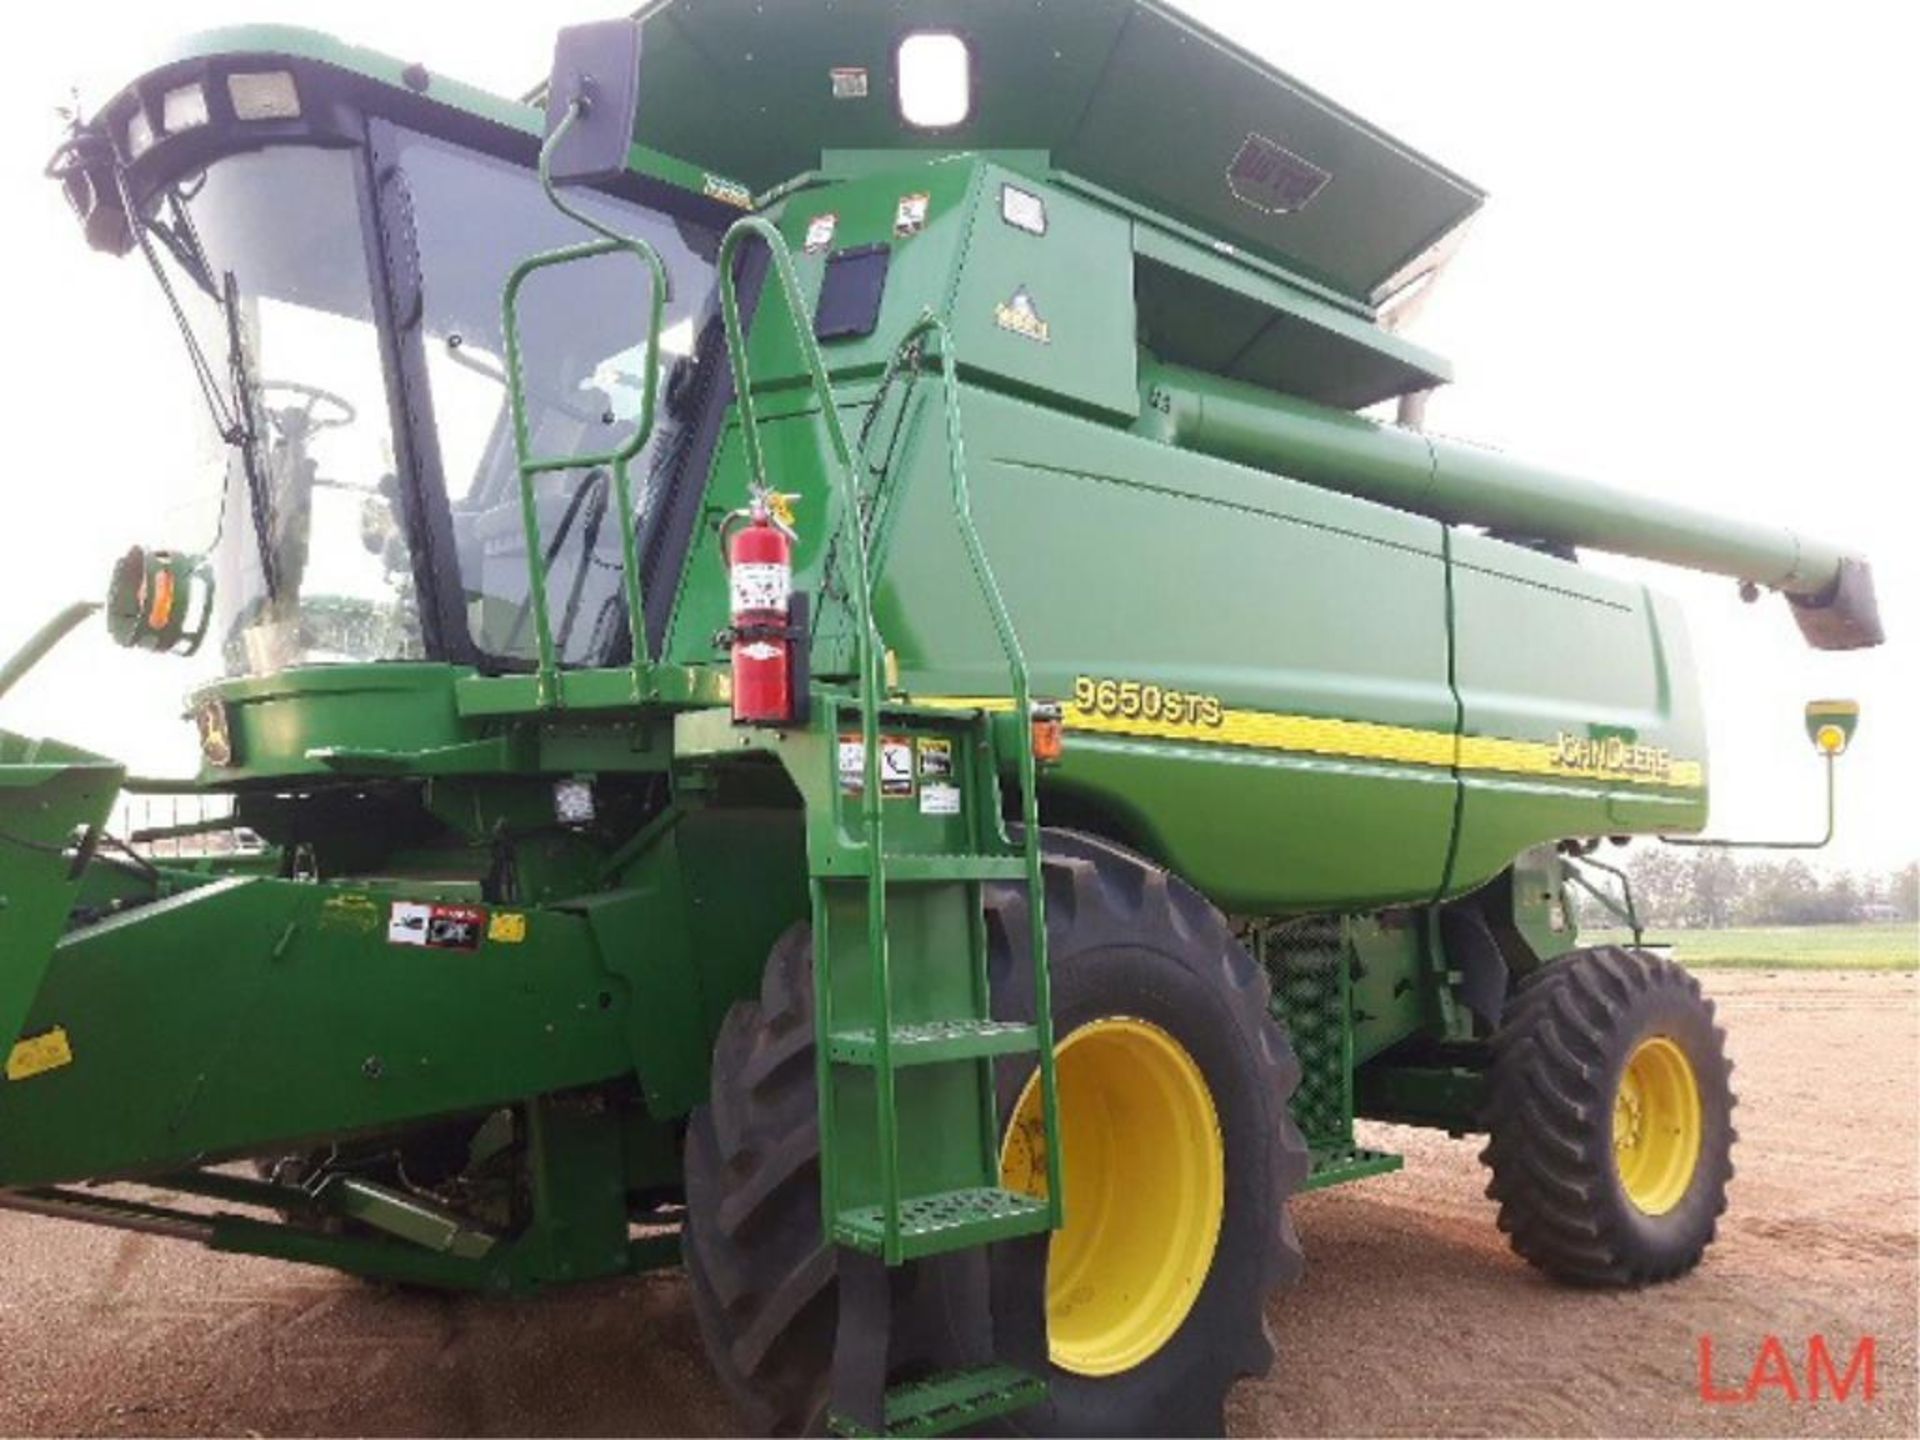 2002 9650 STS JD Combine sn H09650S967101 3537eng hrs, 2740 thres hrs, 290hp, 30.5L-32 fr, 18.4-26